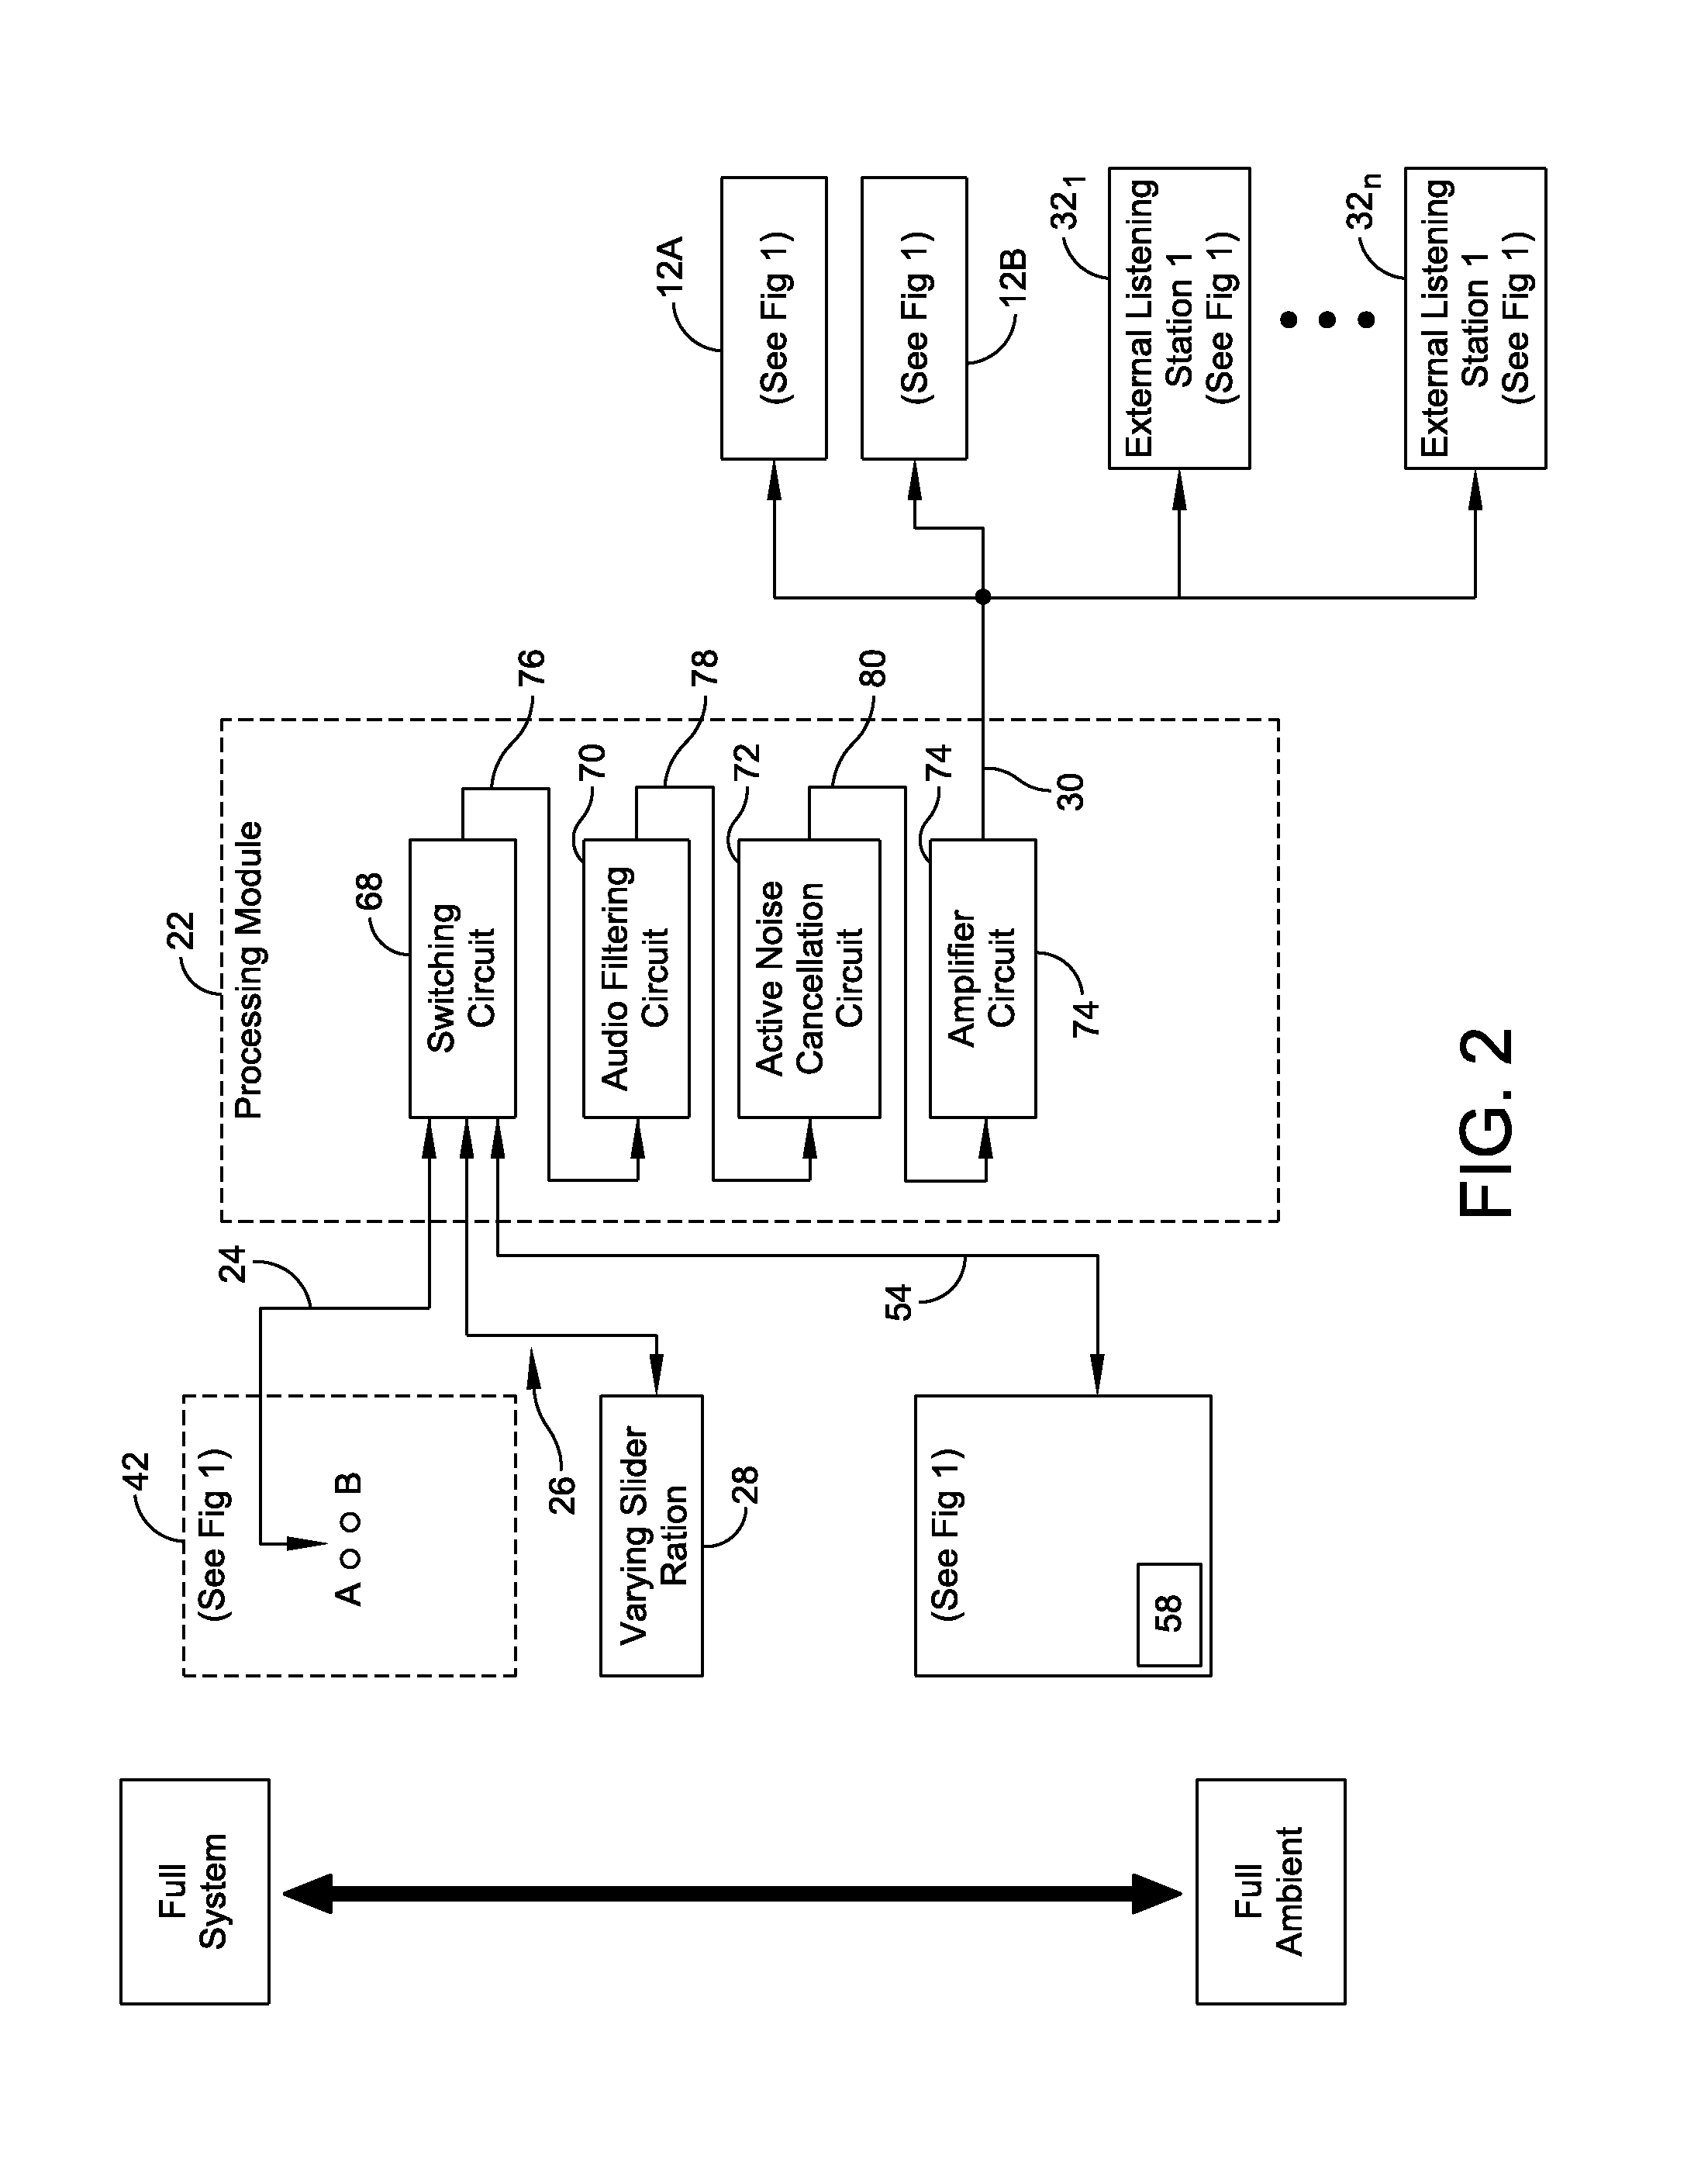 Sound identification and discernment device